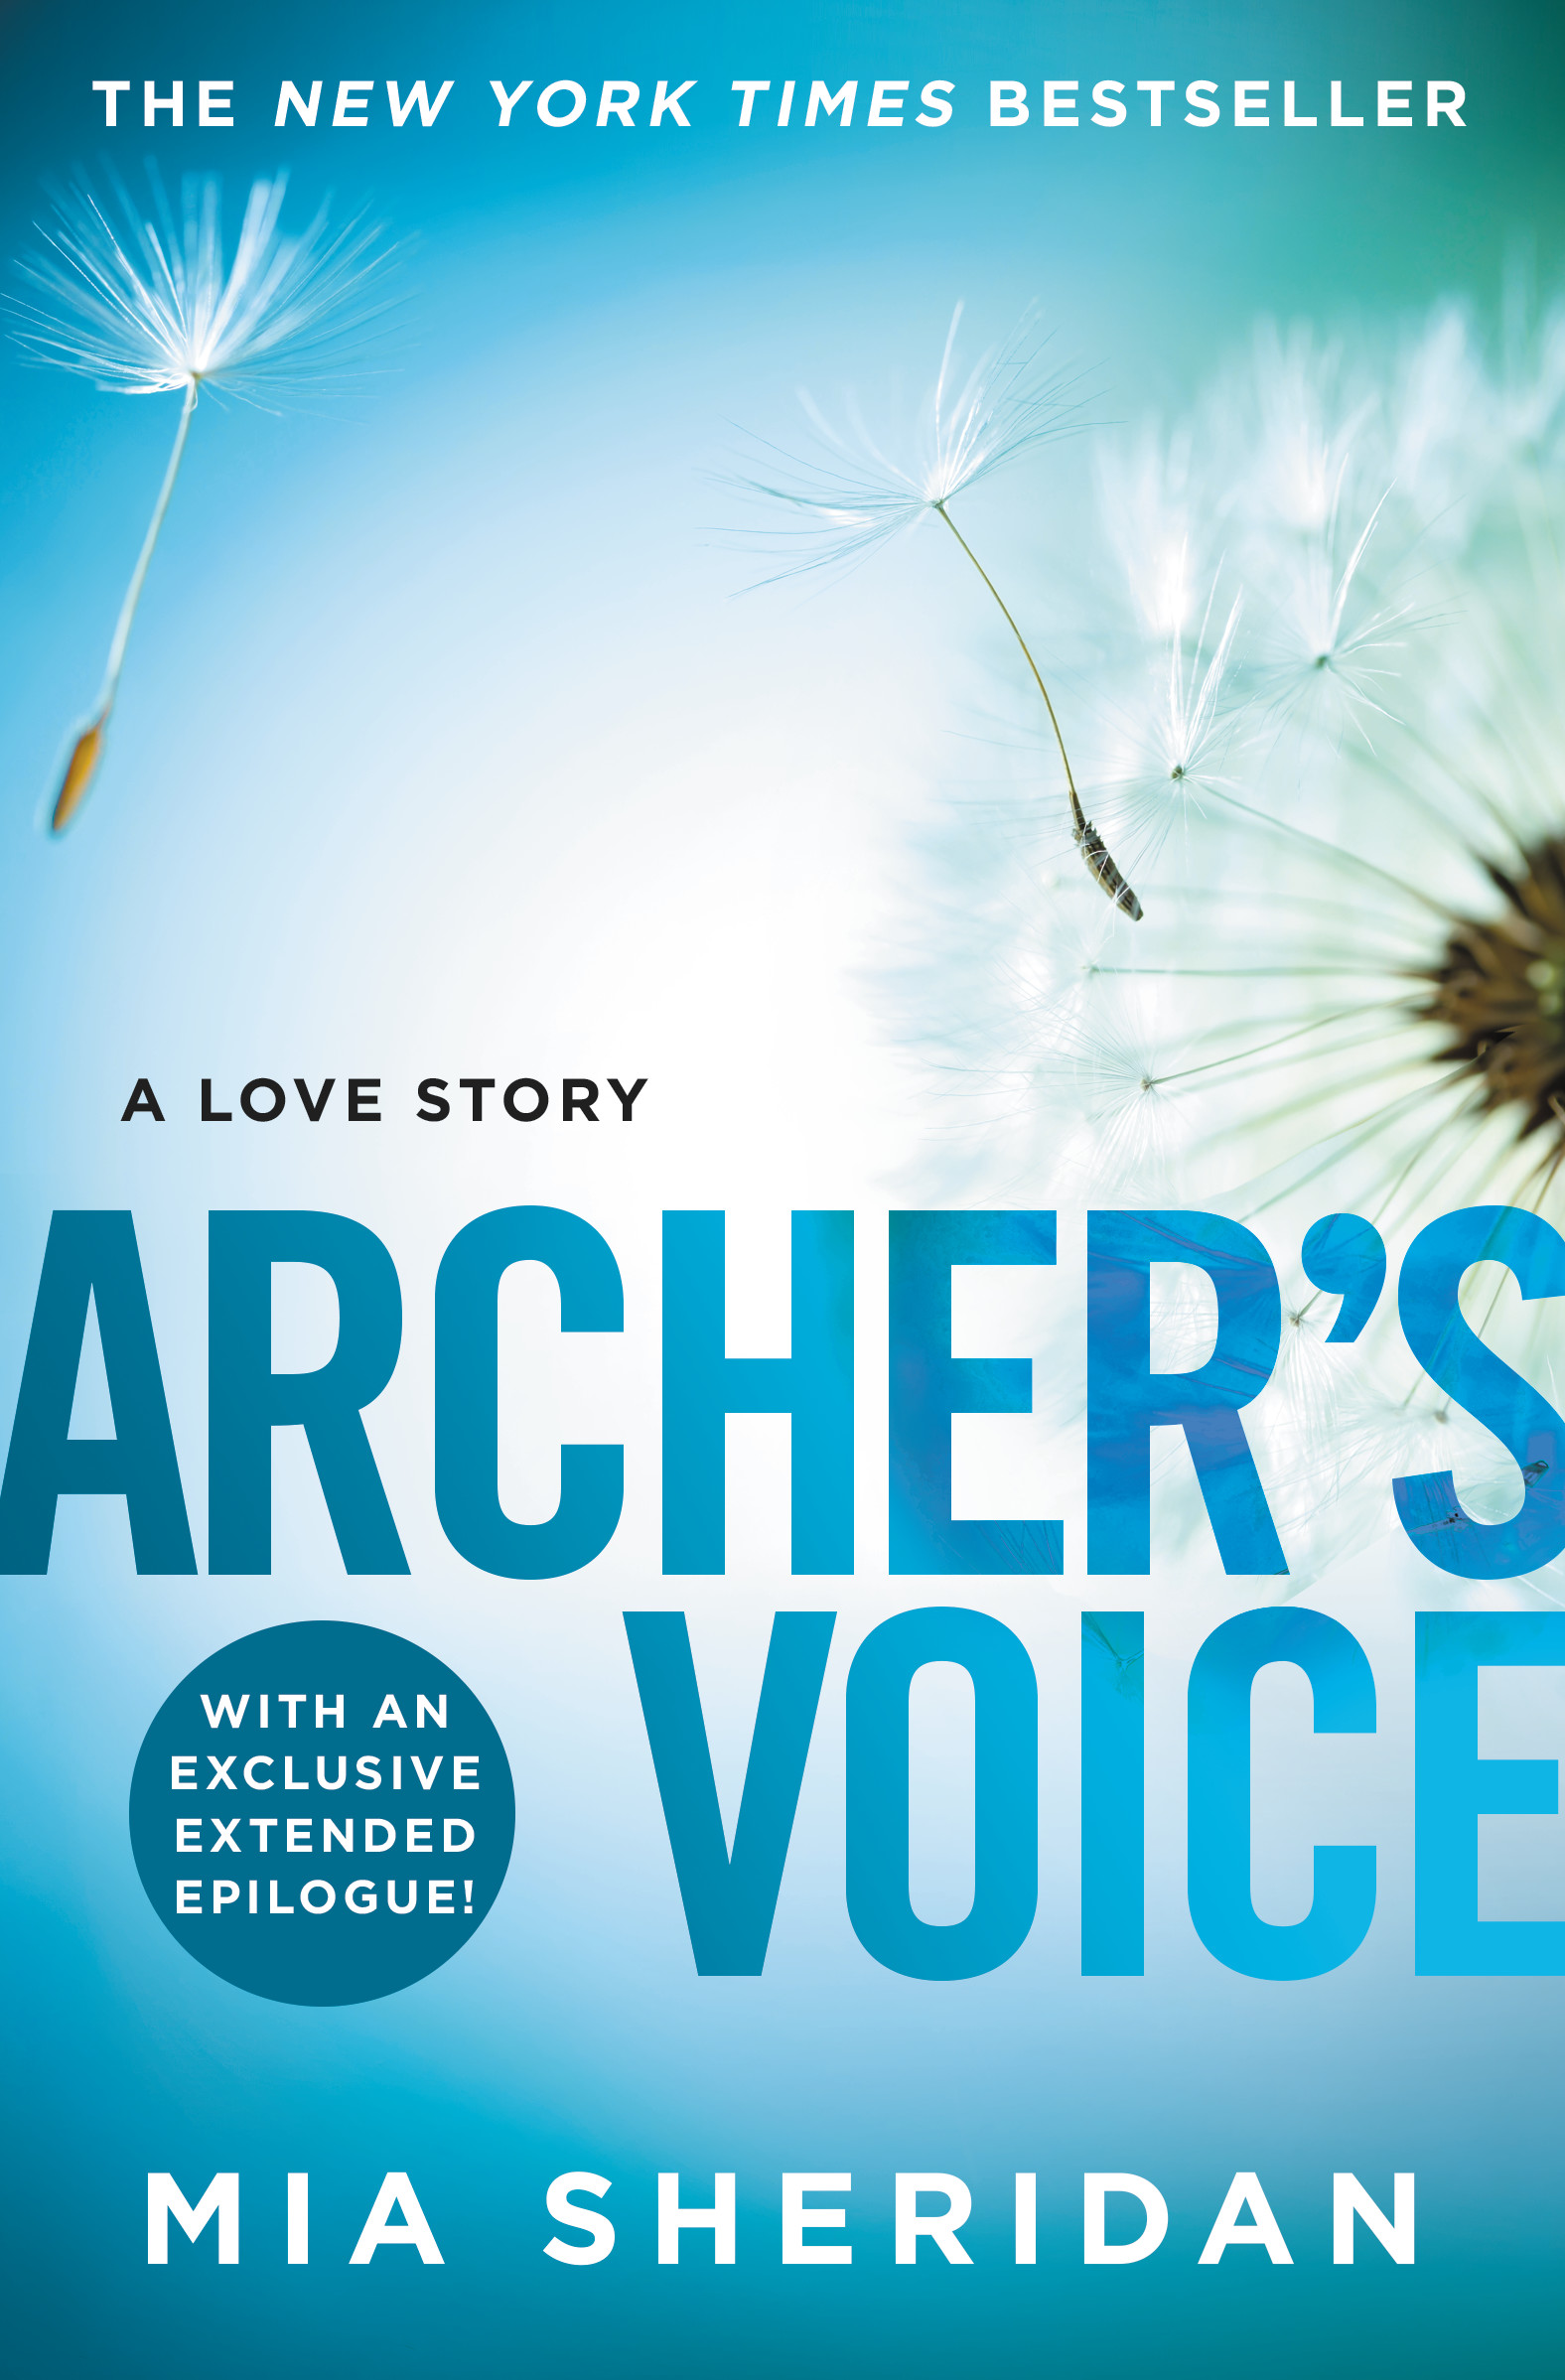 Archer's Voice By Mia Sheridan (Where Love Meets Destiny  #1) free PDF Download Link